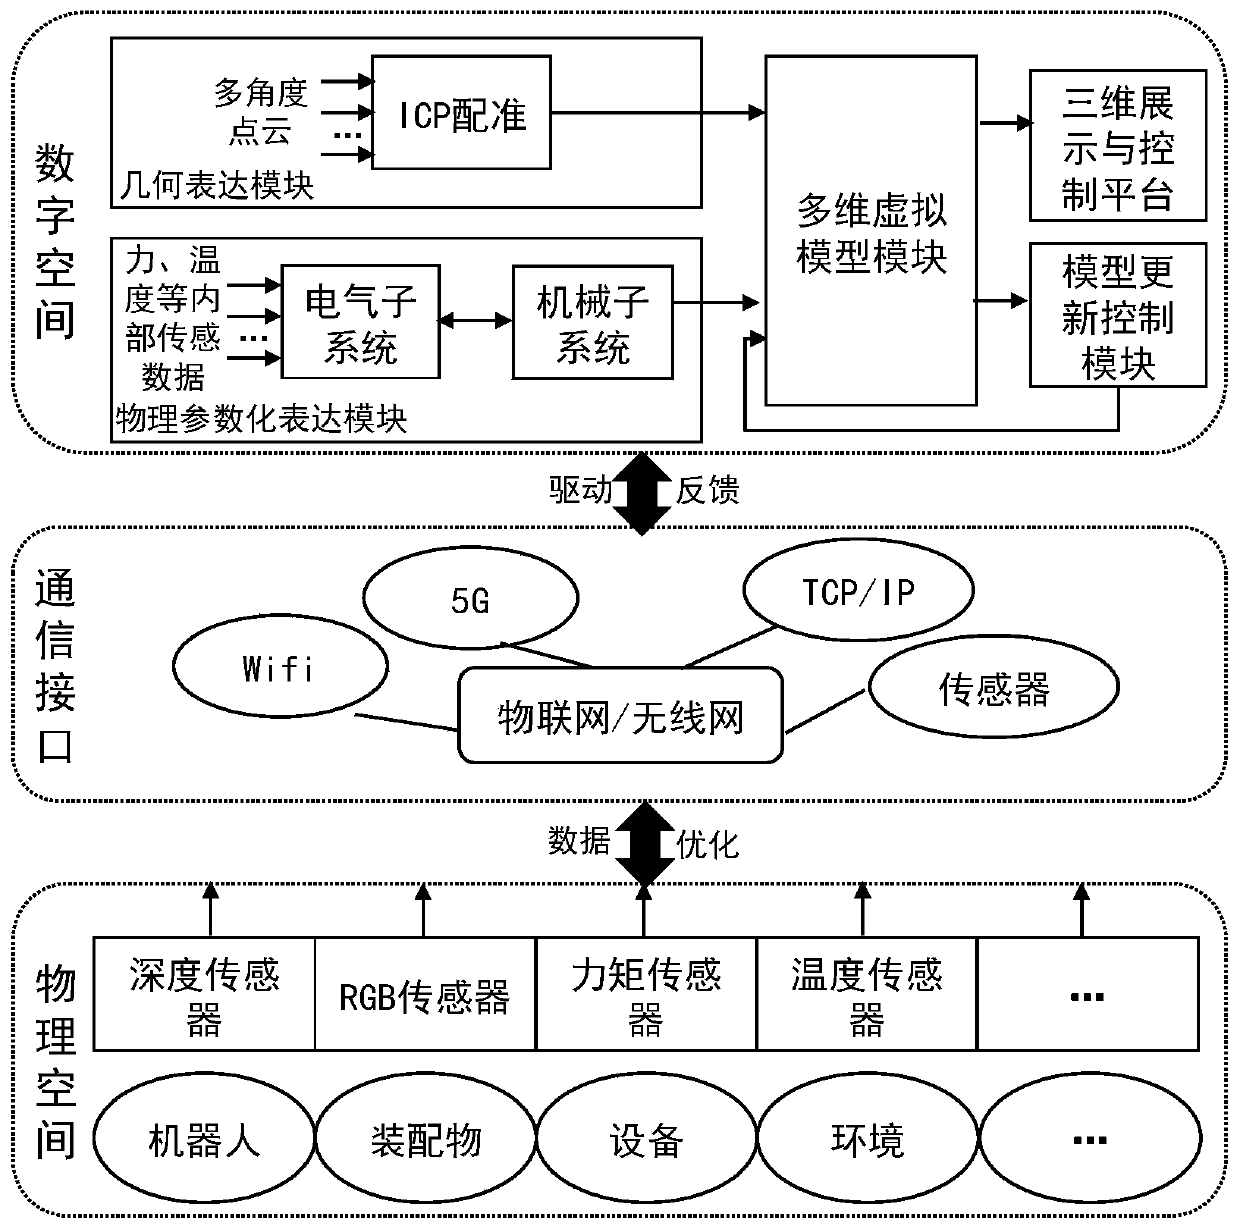 Construction system of digital twinning system for robot assembly